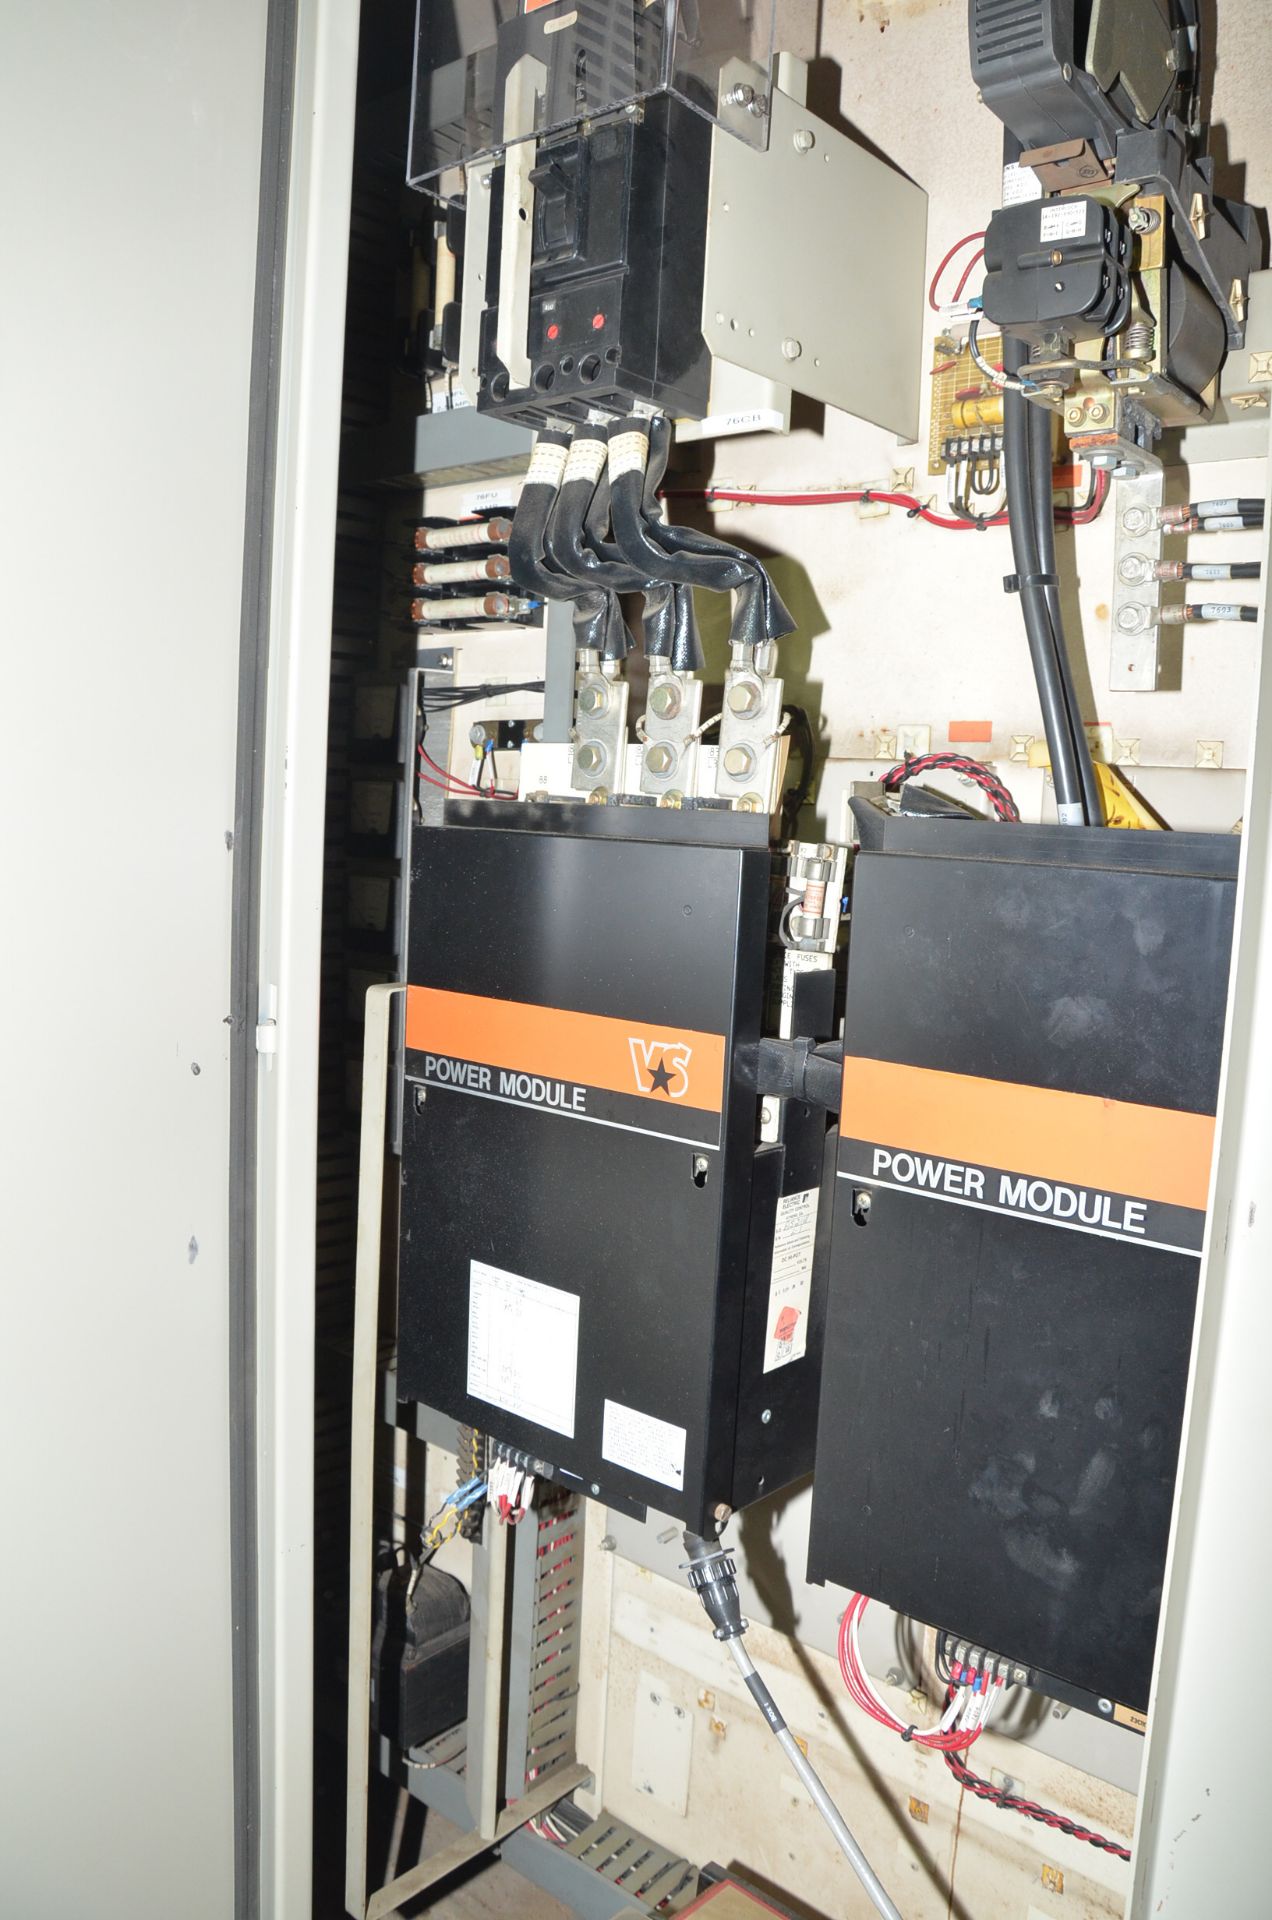 LOT/ PM5 DRIVE ROOM CABINETS CONSISTING OF 6-BANK CONTROL CABINETS WITH REMAINING COMPONENTS [ - Image 5 of 6